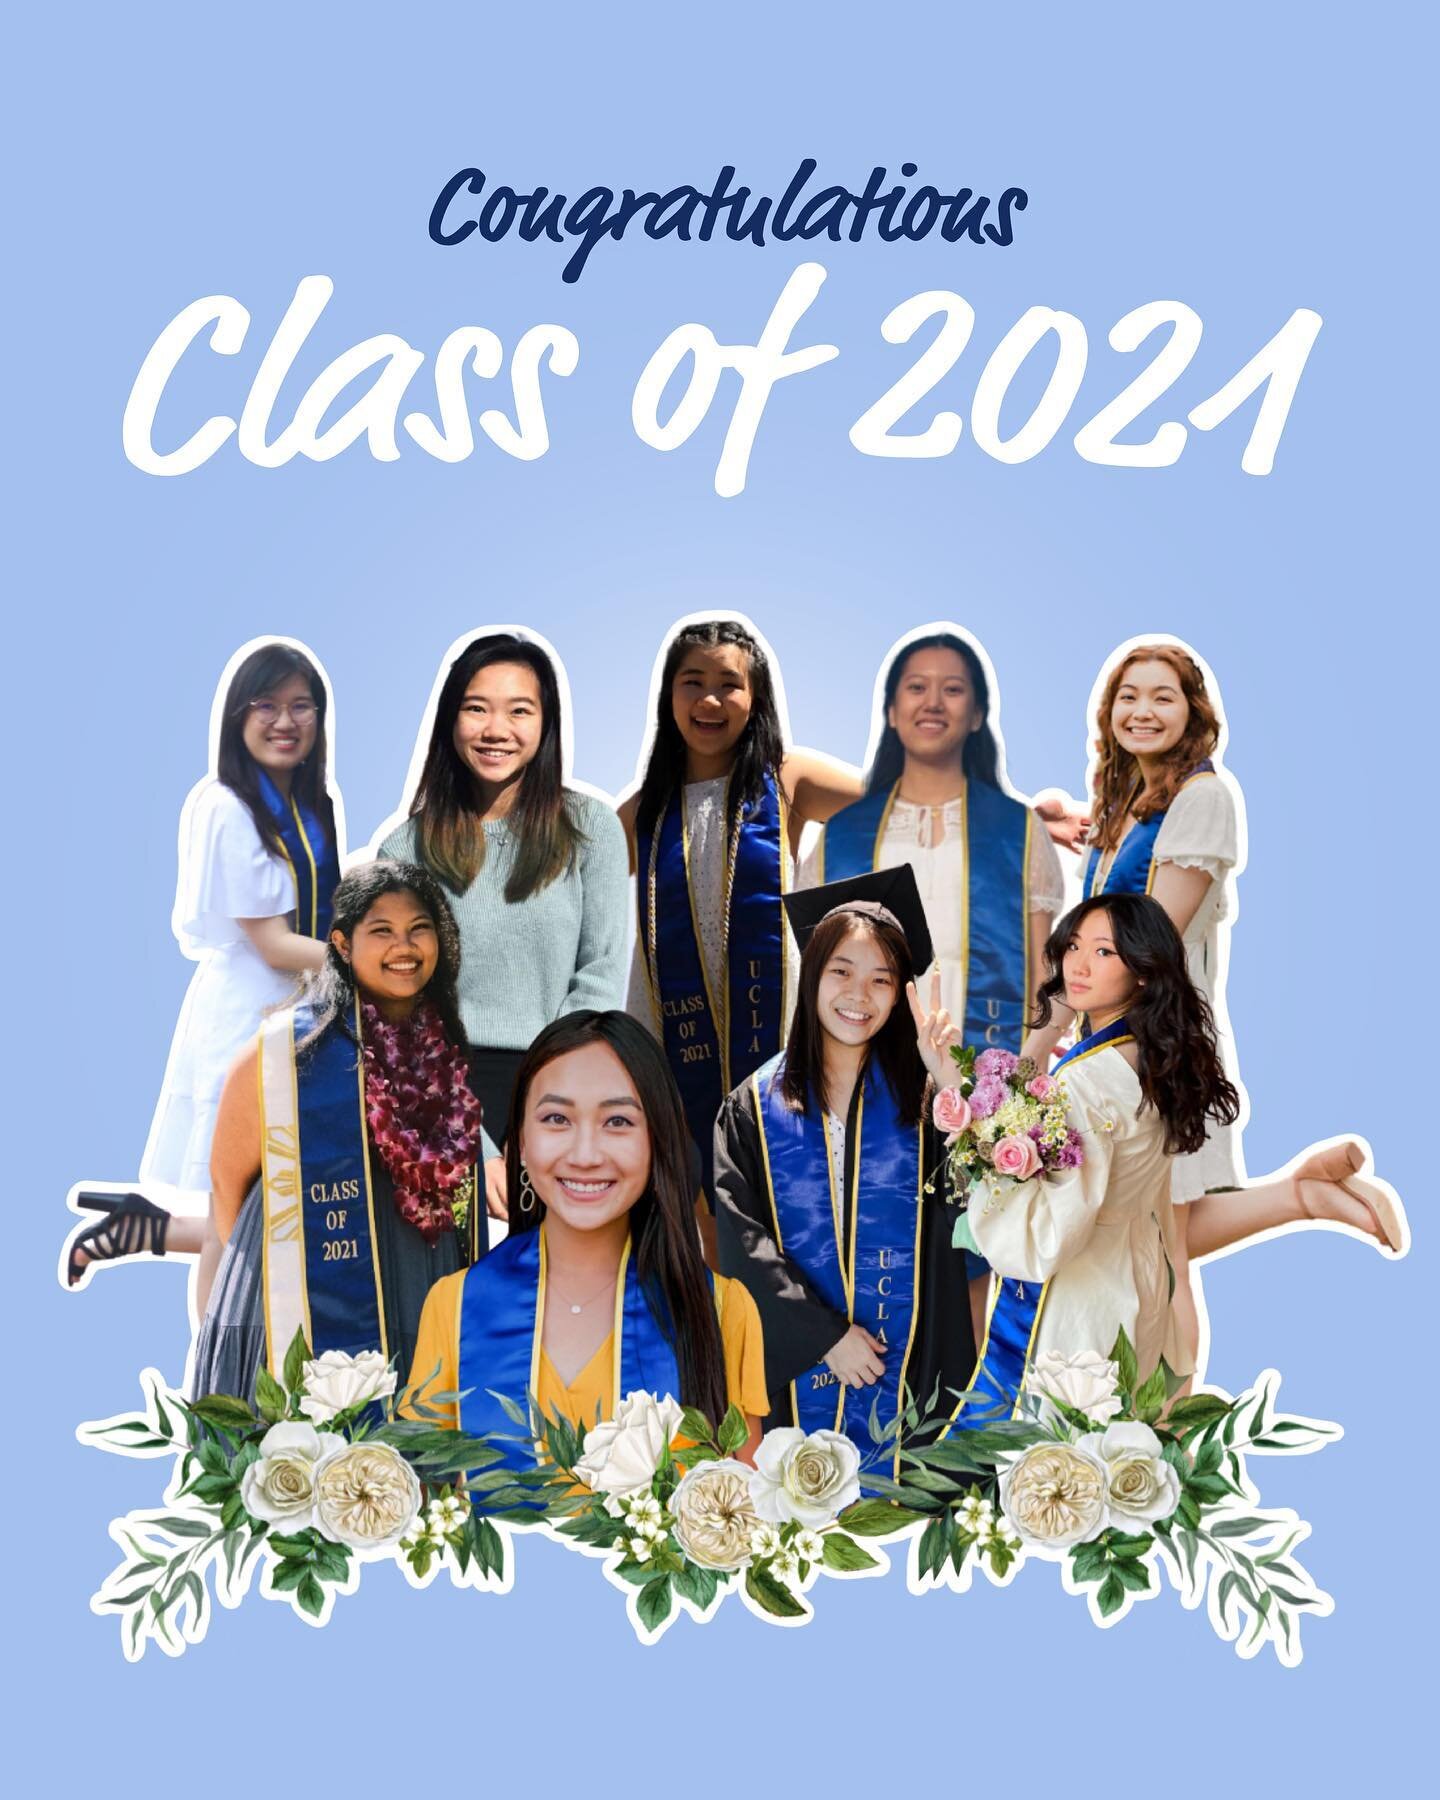 Huge congrats to our TW seniors for graduating this month! 👩🏻&zwj;🎓

We&rsquo;re so proud of all that they have achieved and will accomplish in post-grad life 🥳

#gobruins #4sup